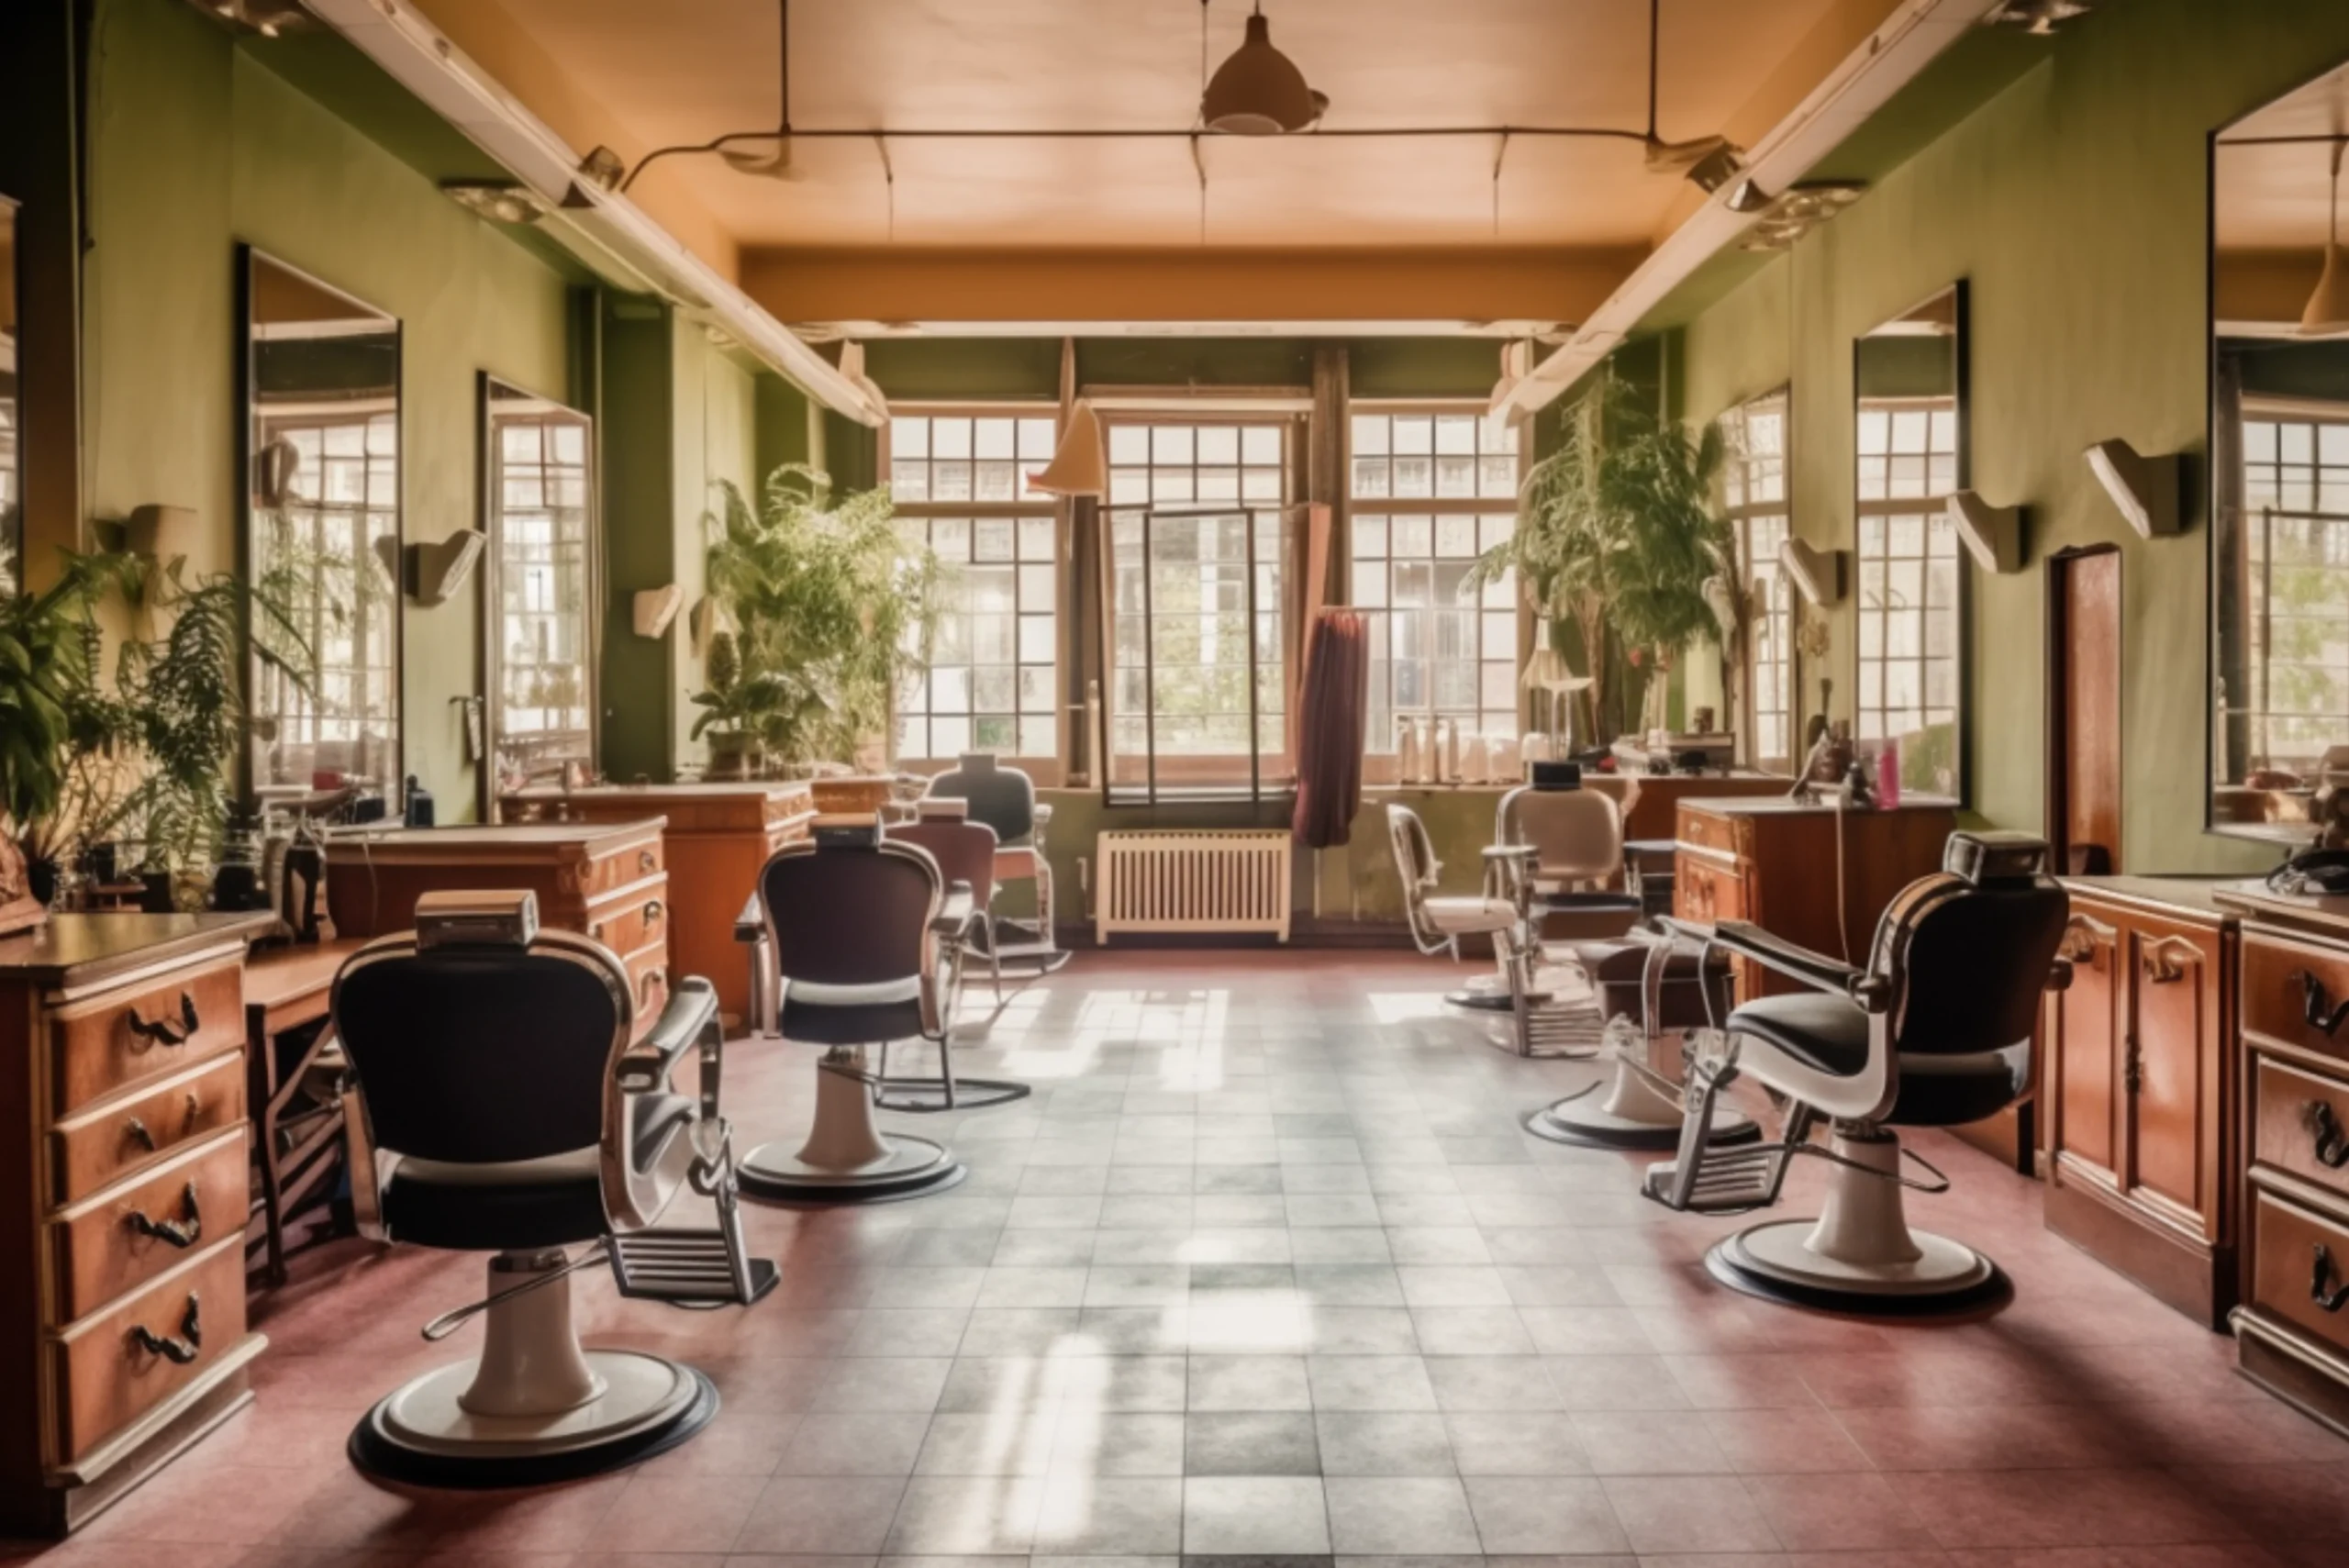 How To Own A Beauty Salon a Comprehensive Guide